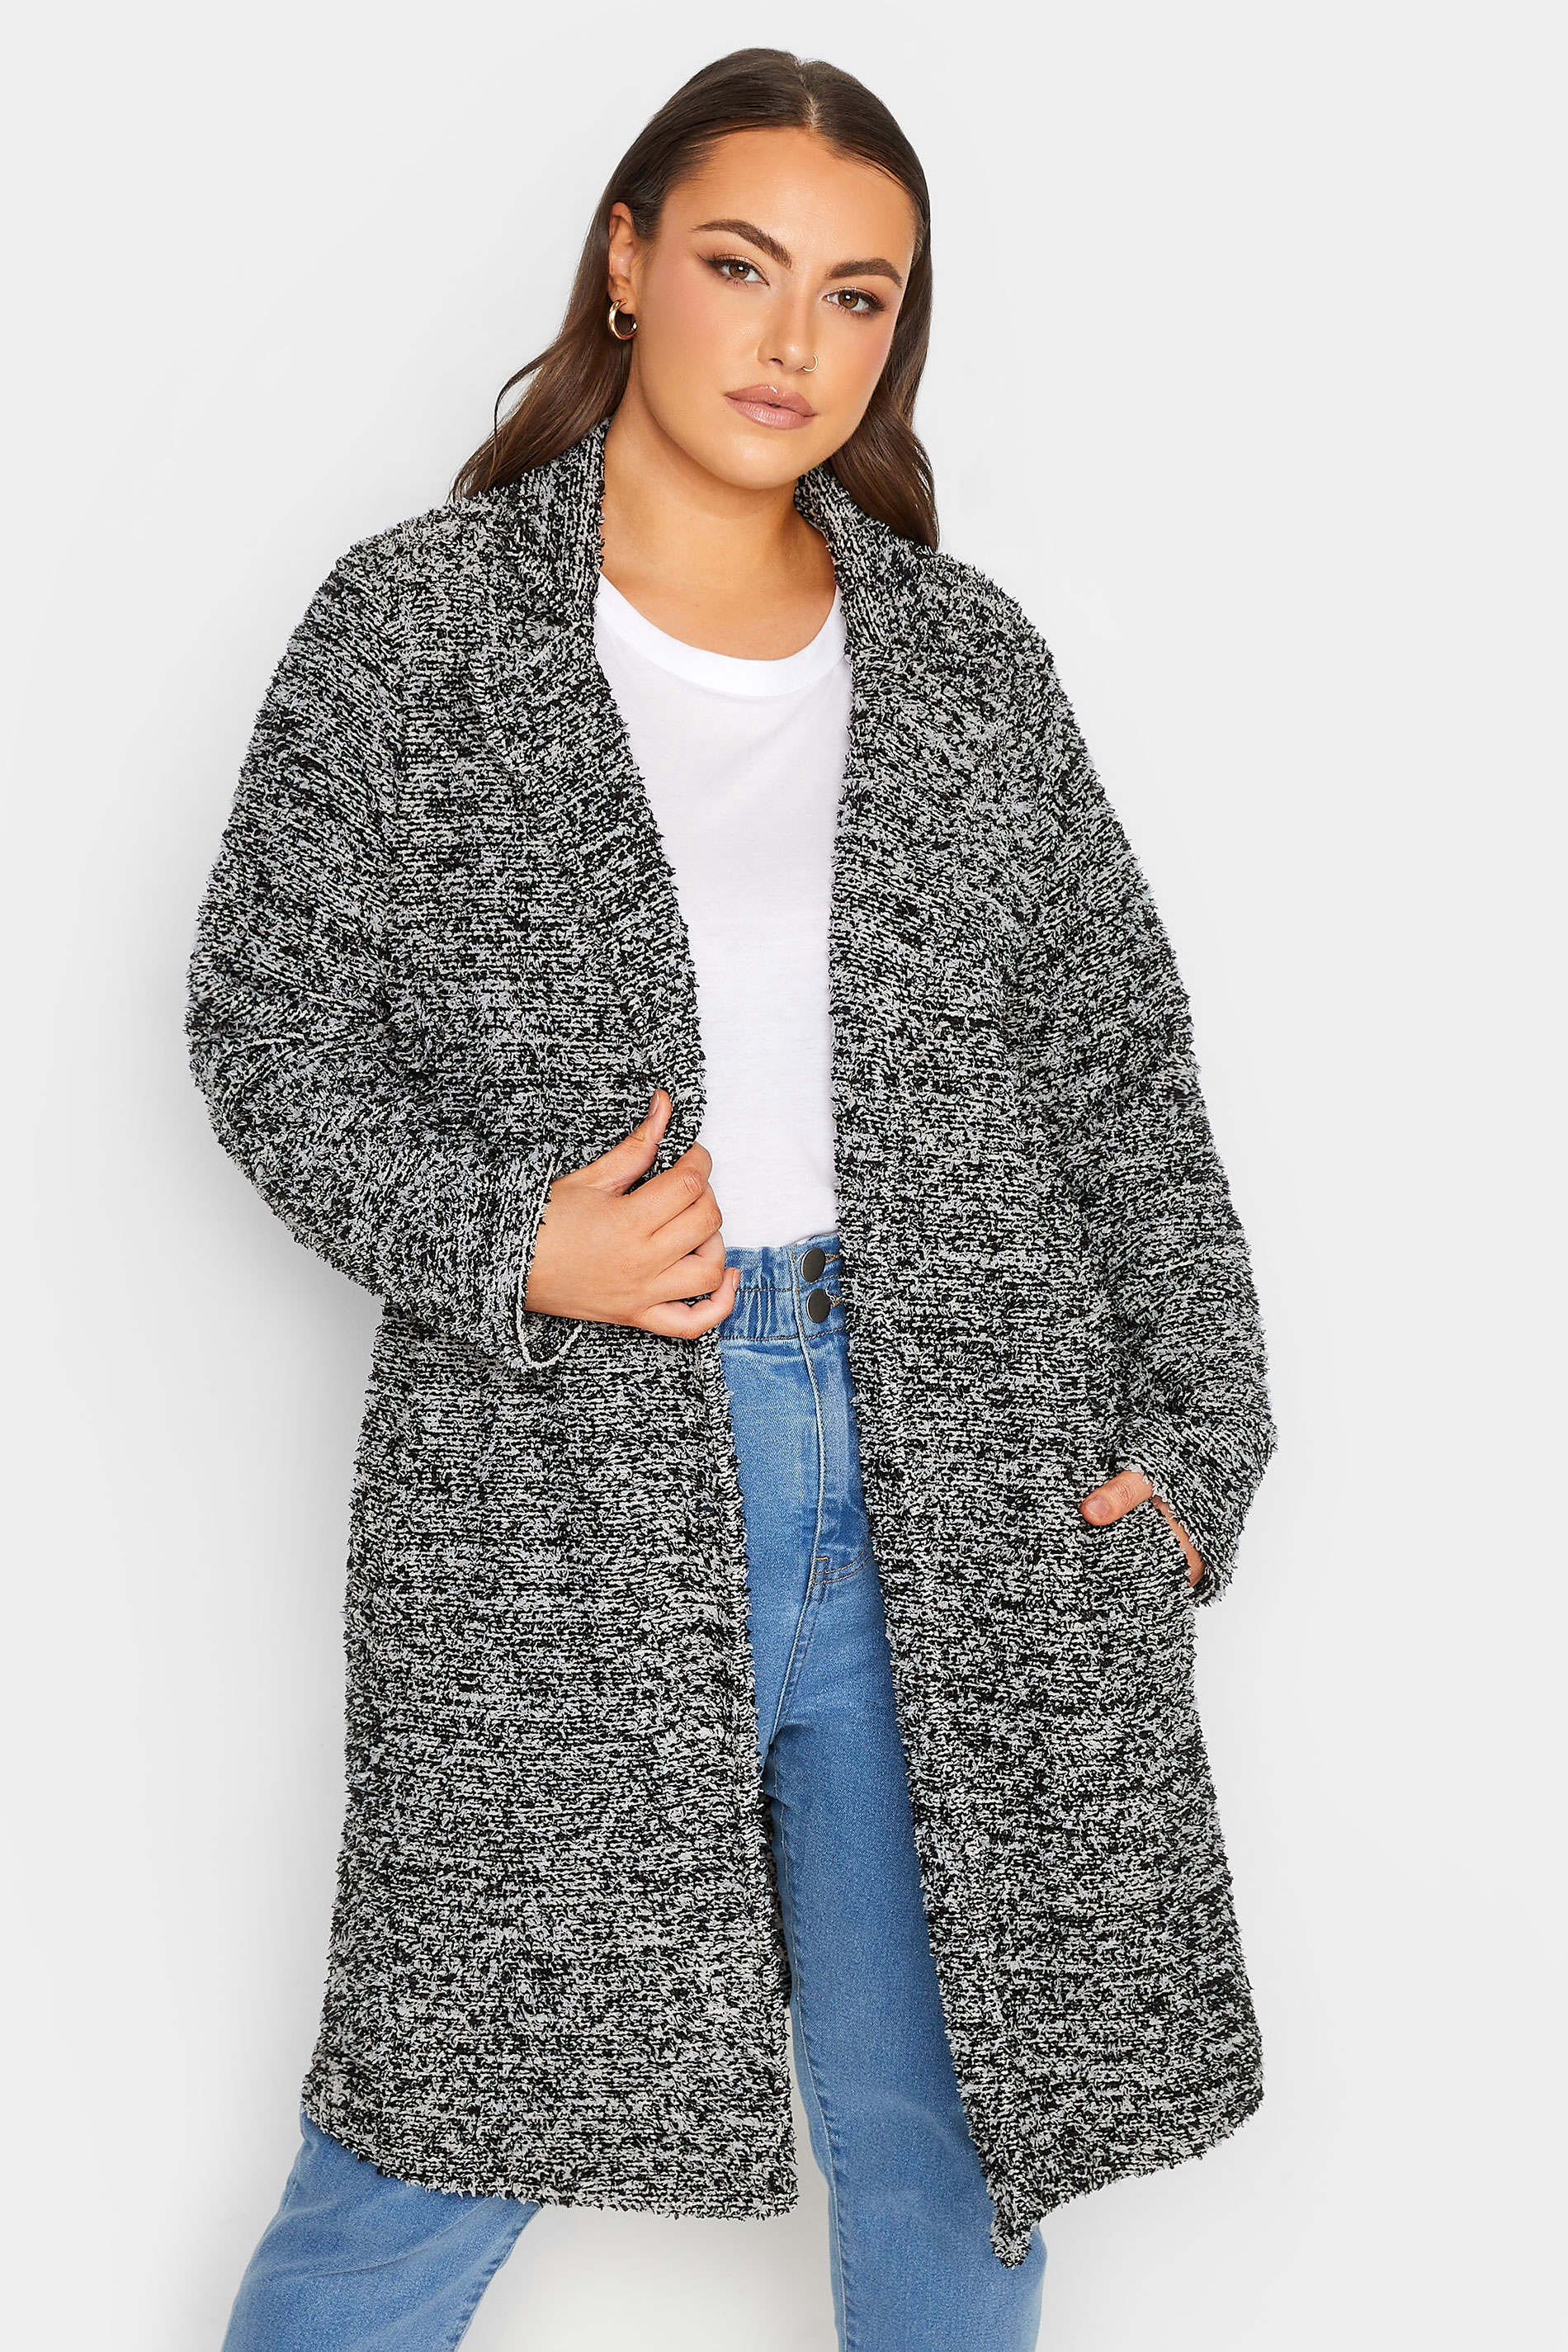 YOURS LUXURY Plus Size Black Textured Faux Fur Jacket | Yours Clothing 1